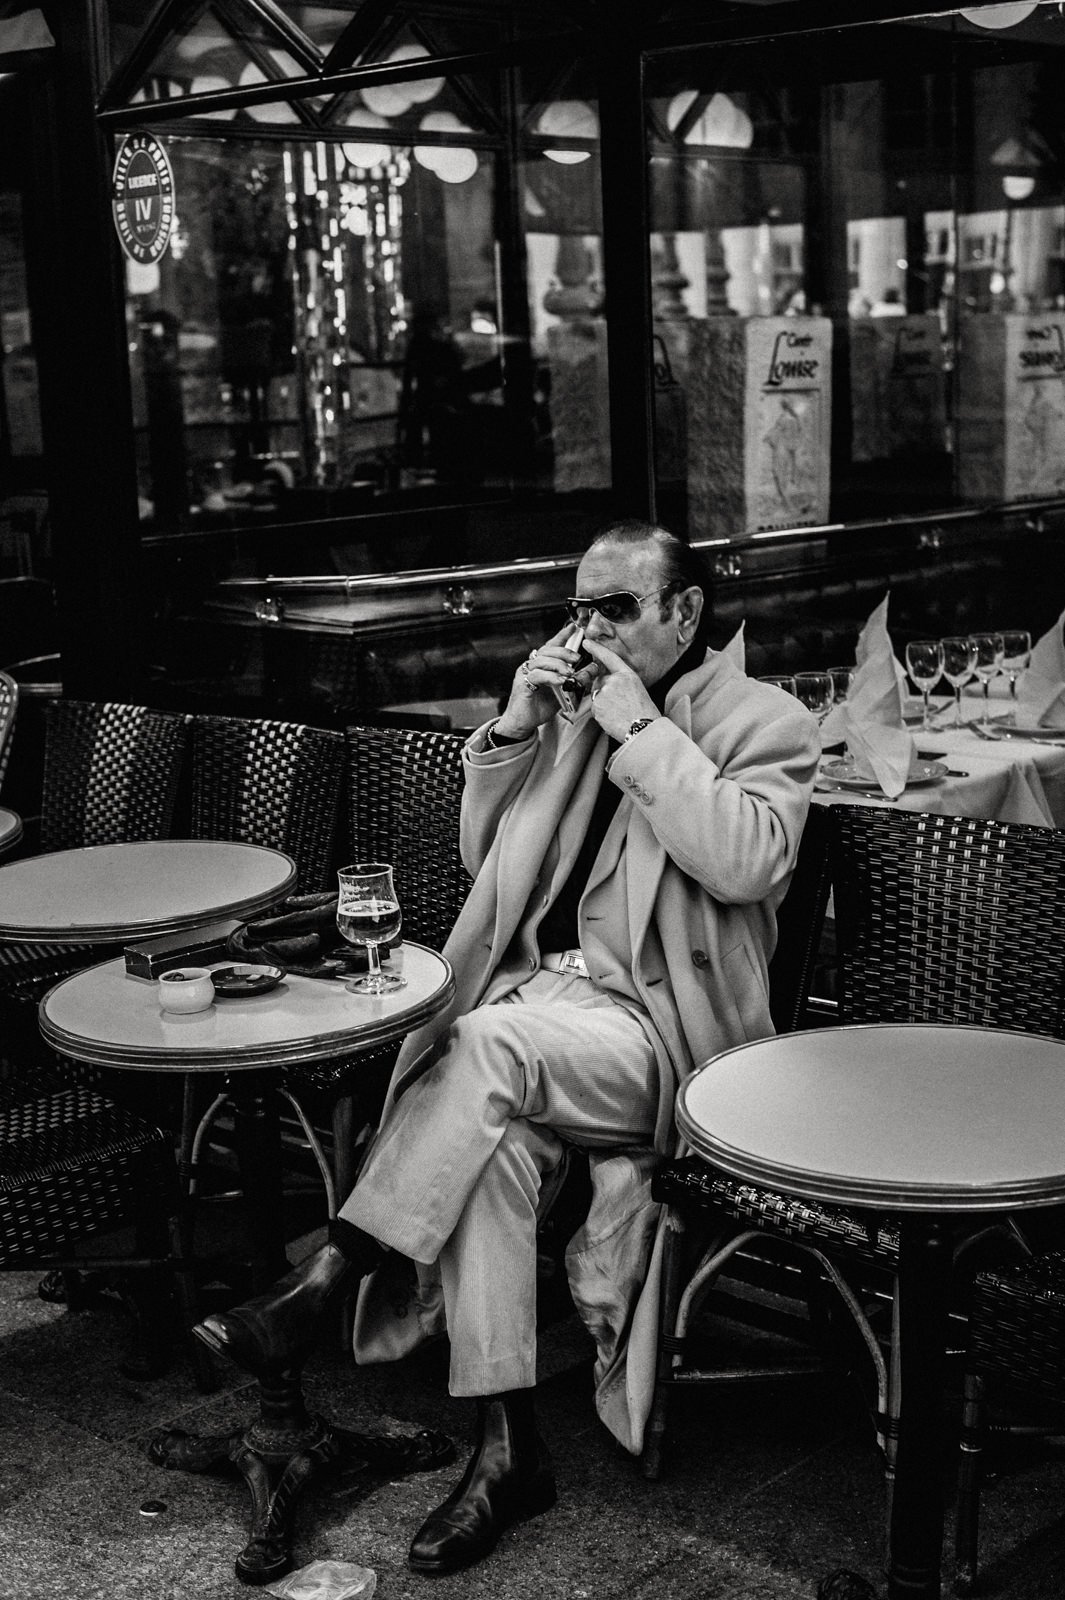 A Parisian man smoking and having a drink in a cafe